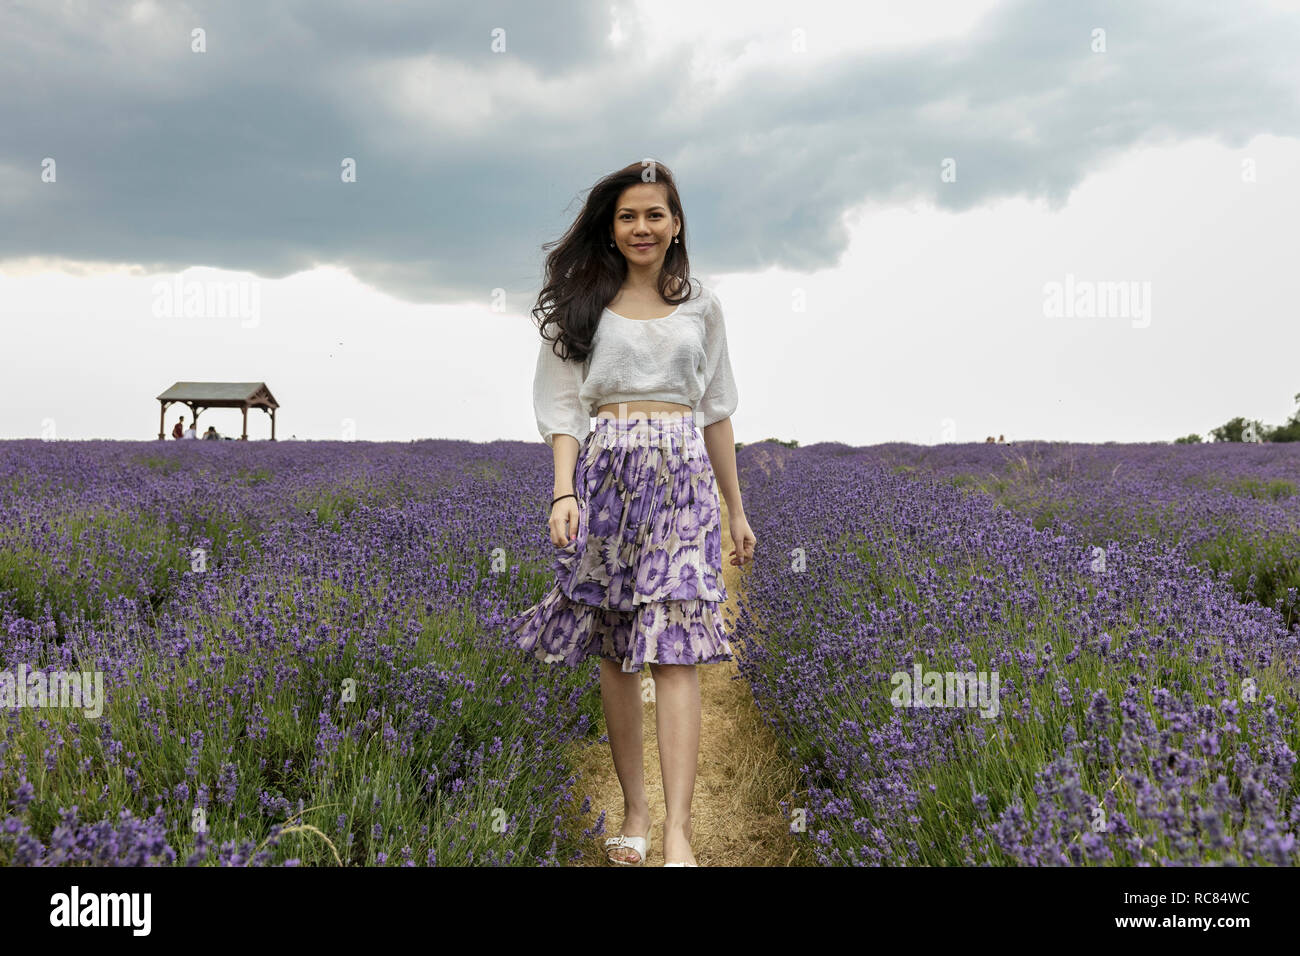 Mid adult woman with long brown hair strolling through lavender field, portrait Stock Photo